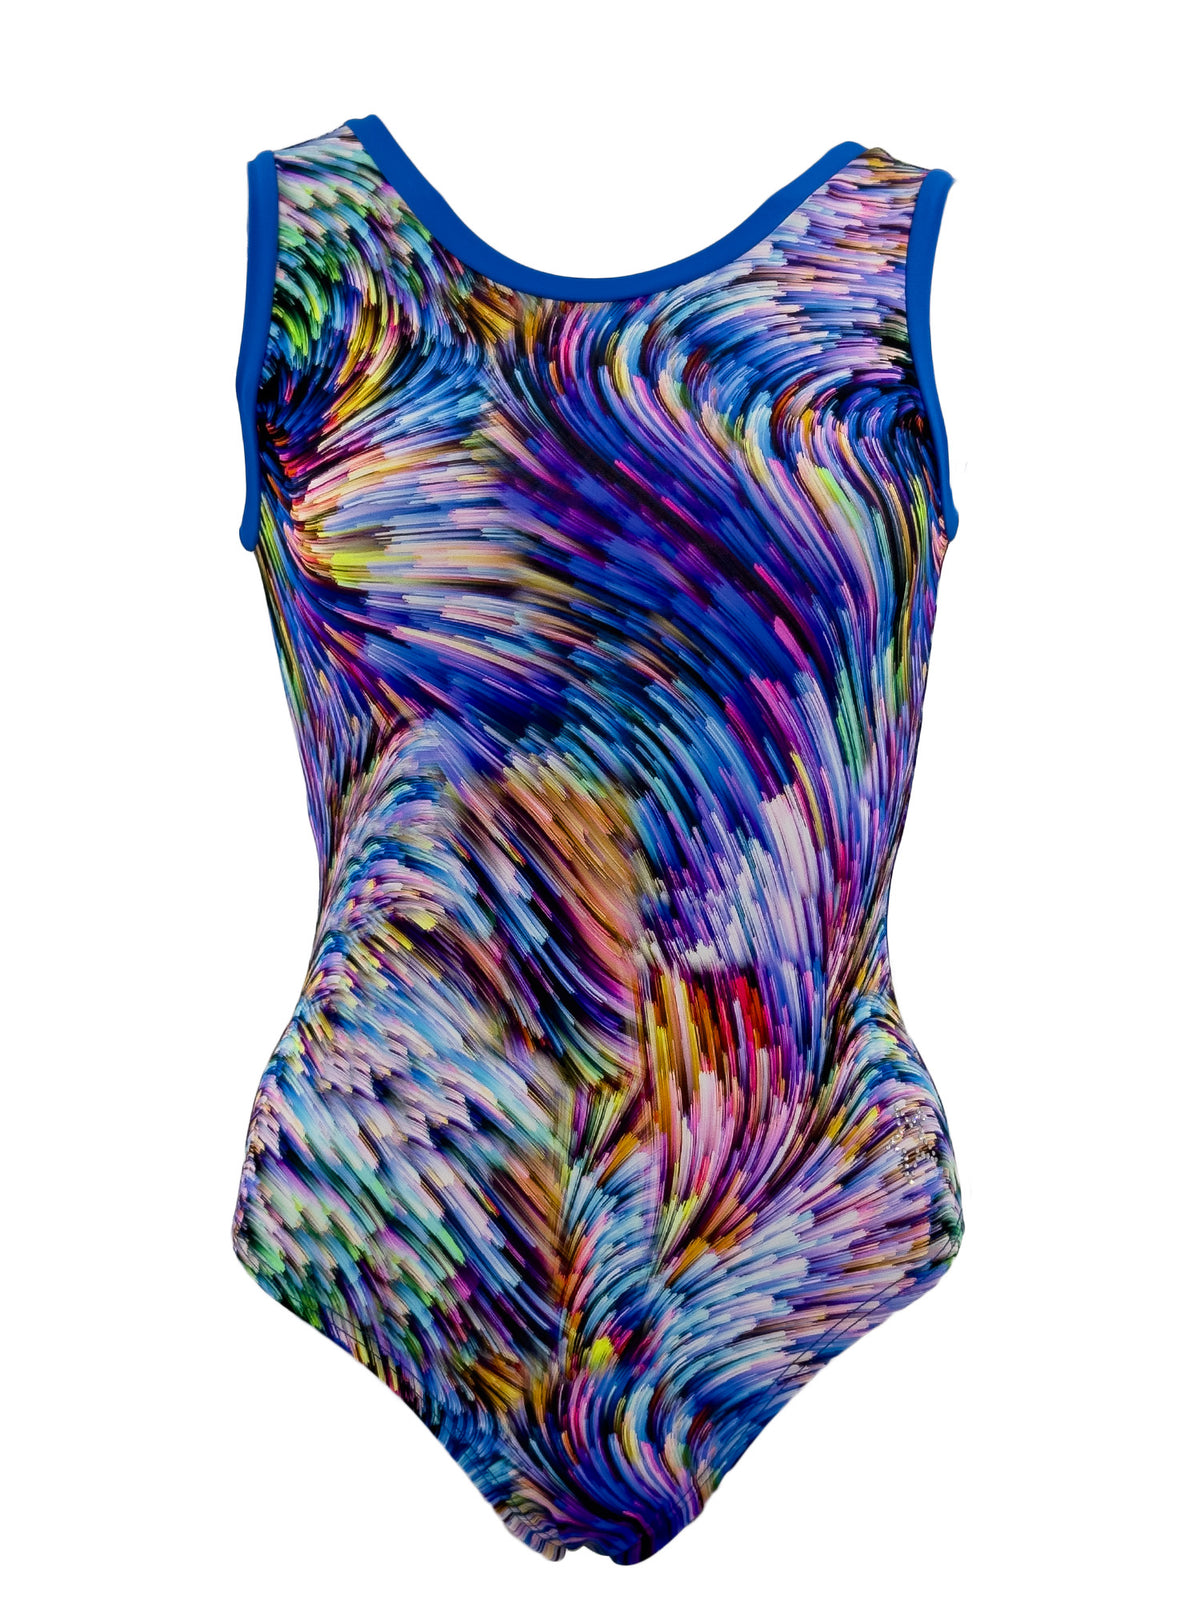 Light Speed Tank Style leotard front view